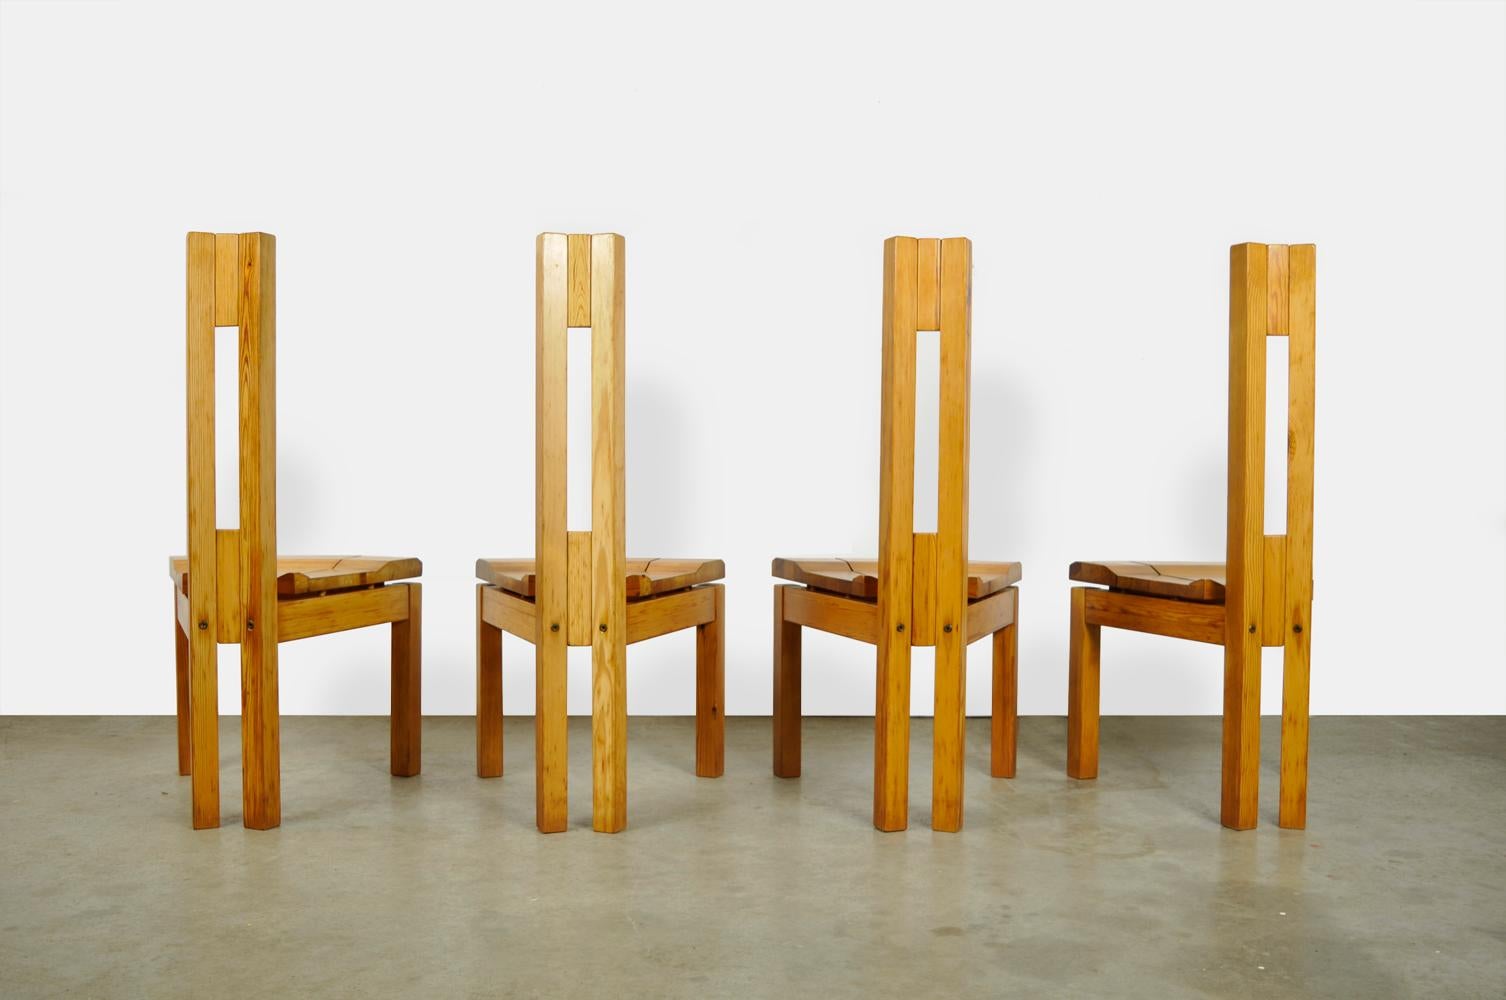 Scandinavian Modern Pine Dining Chairs “Rantasipi” by Arnold Lerber for Laukaan Puu, Finland, 1970s For Sale